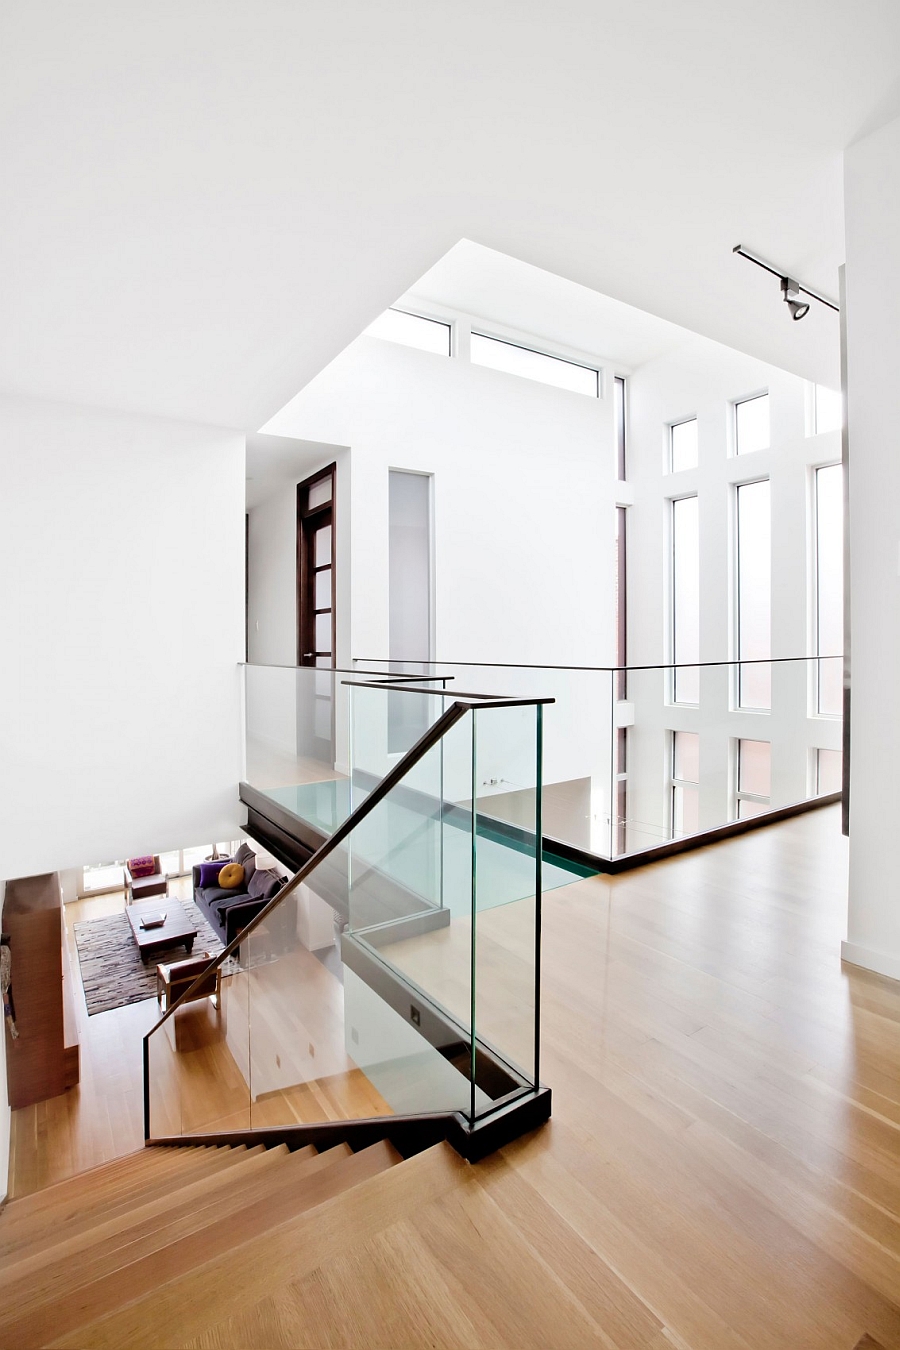 Glass staircase railing and walkway give the home an airy appearance